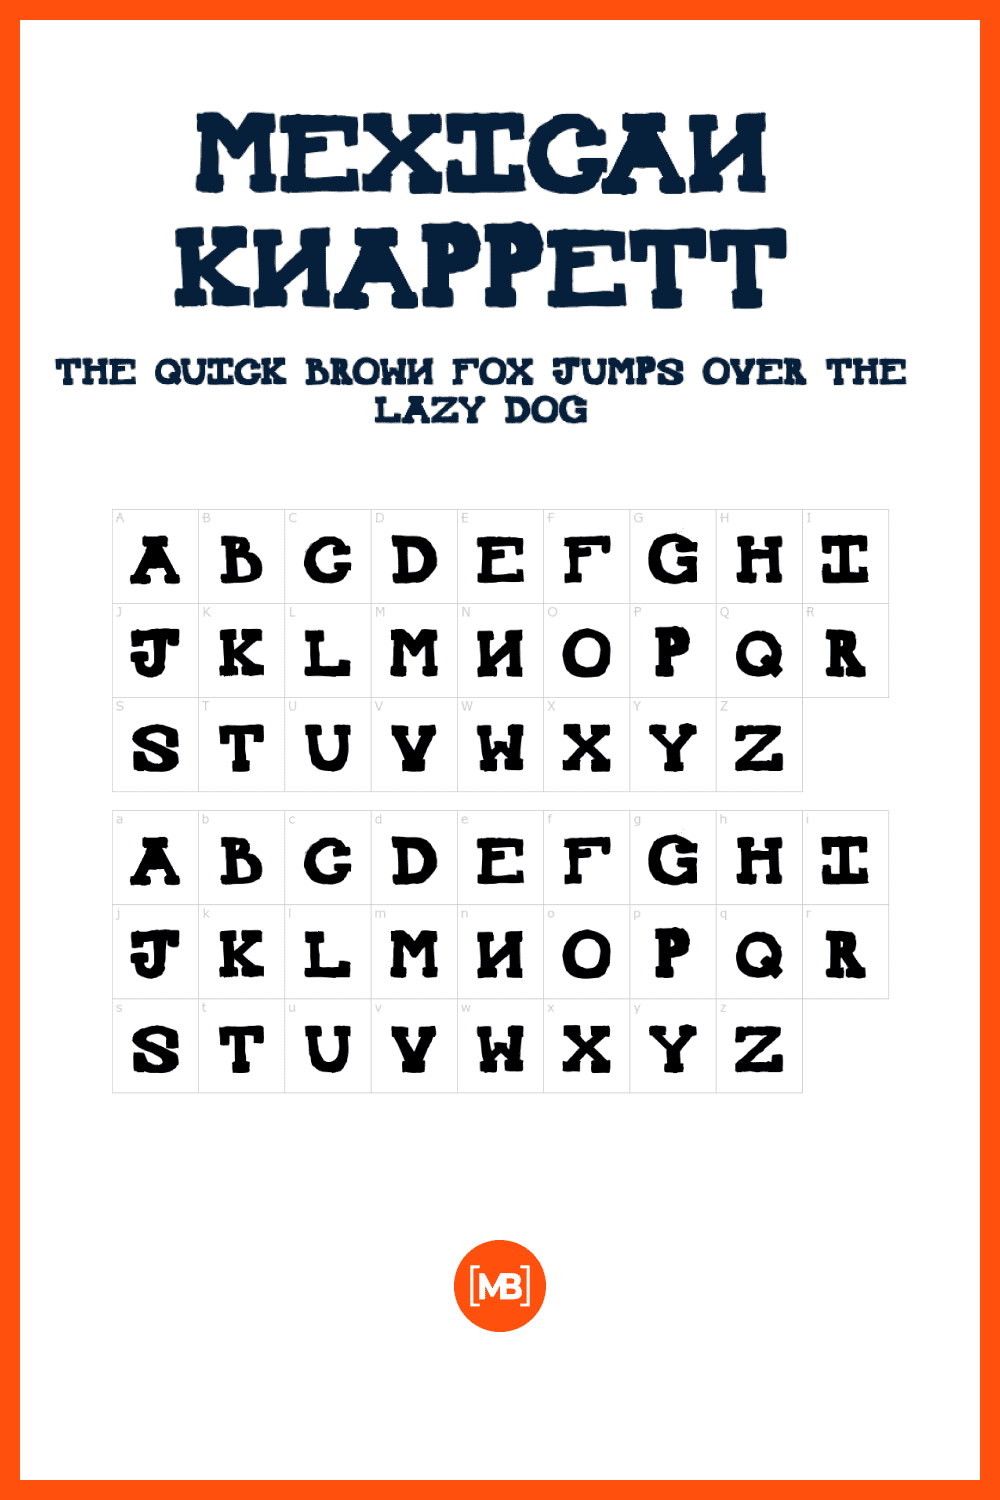 Mexican Knappett is a Modern type font that can be used on any device.